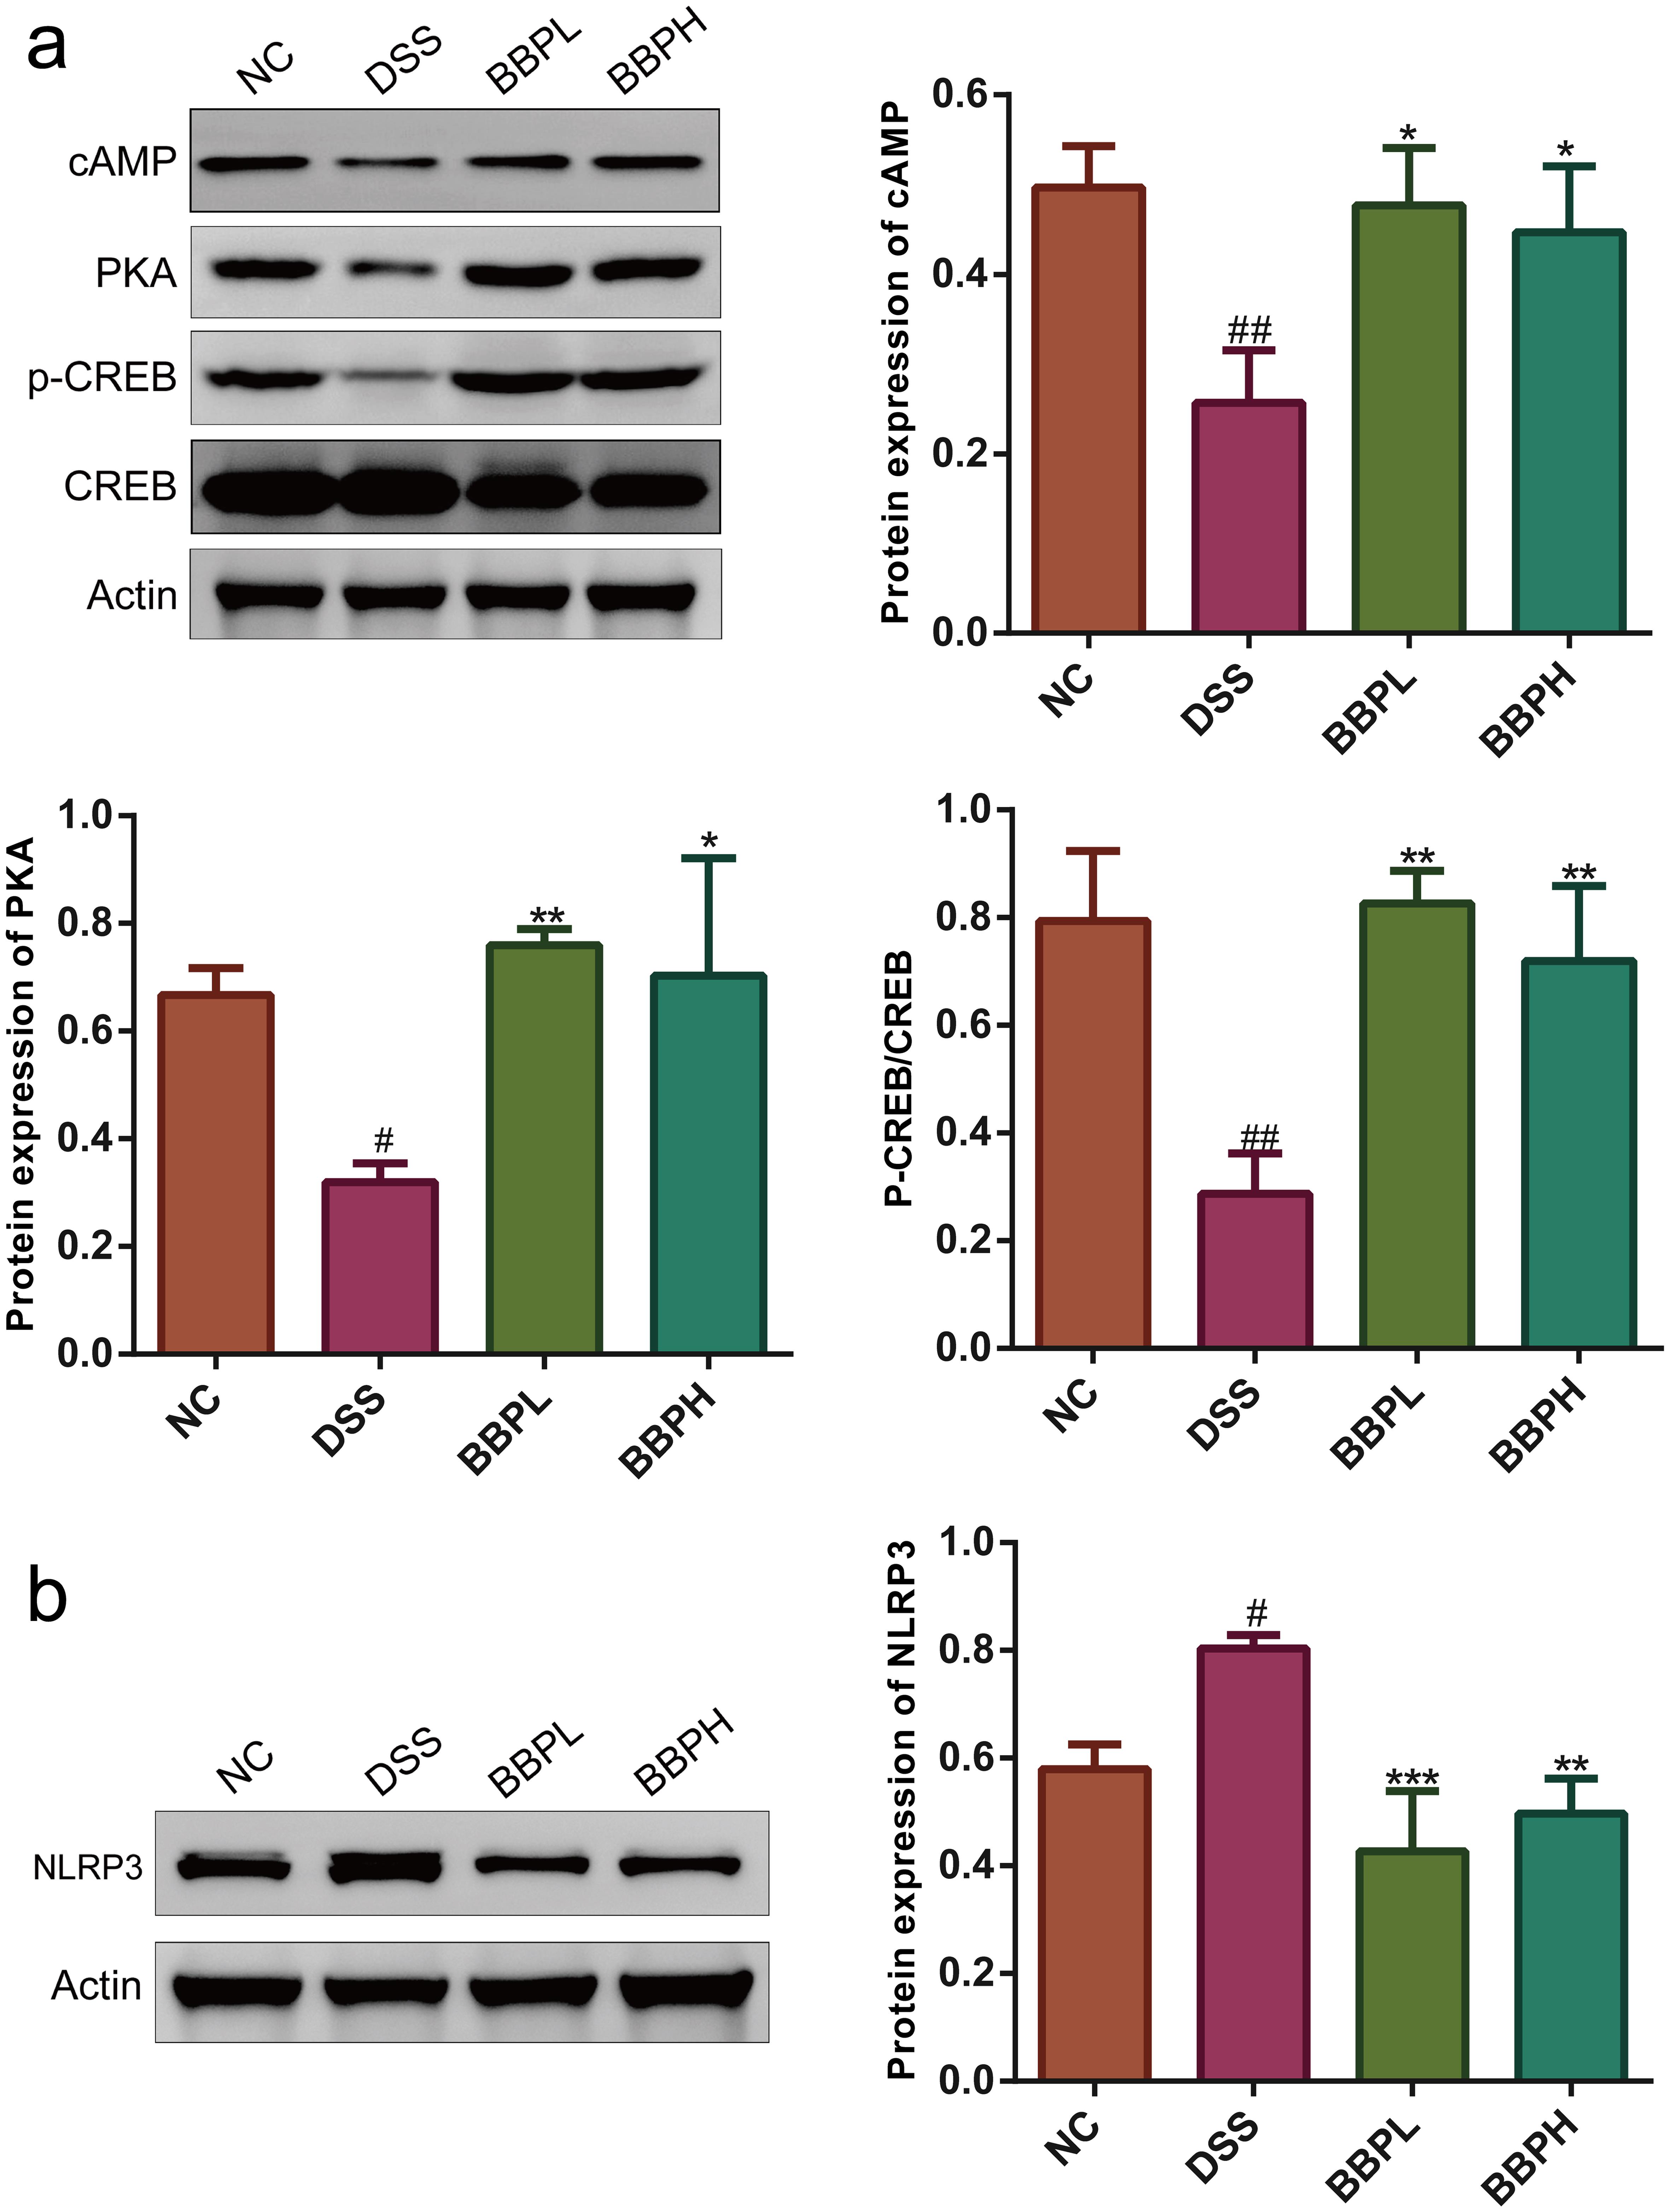 BBP regulates protein expression in colon tissue of UC mice.